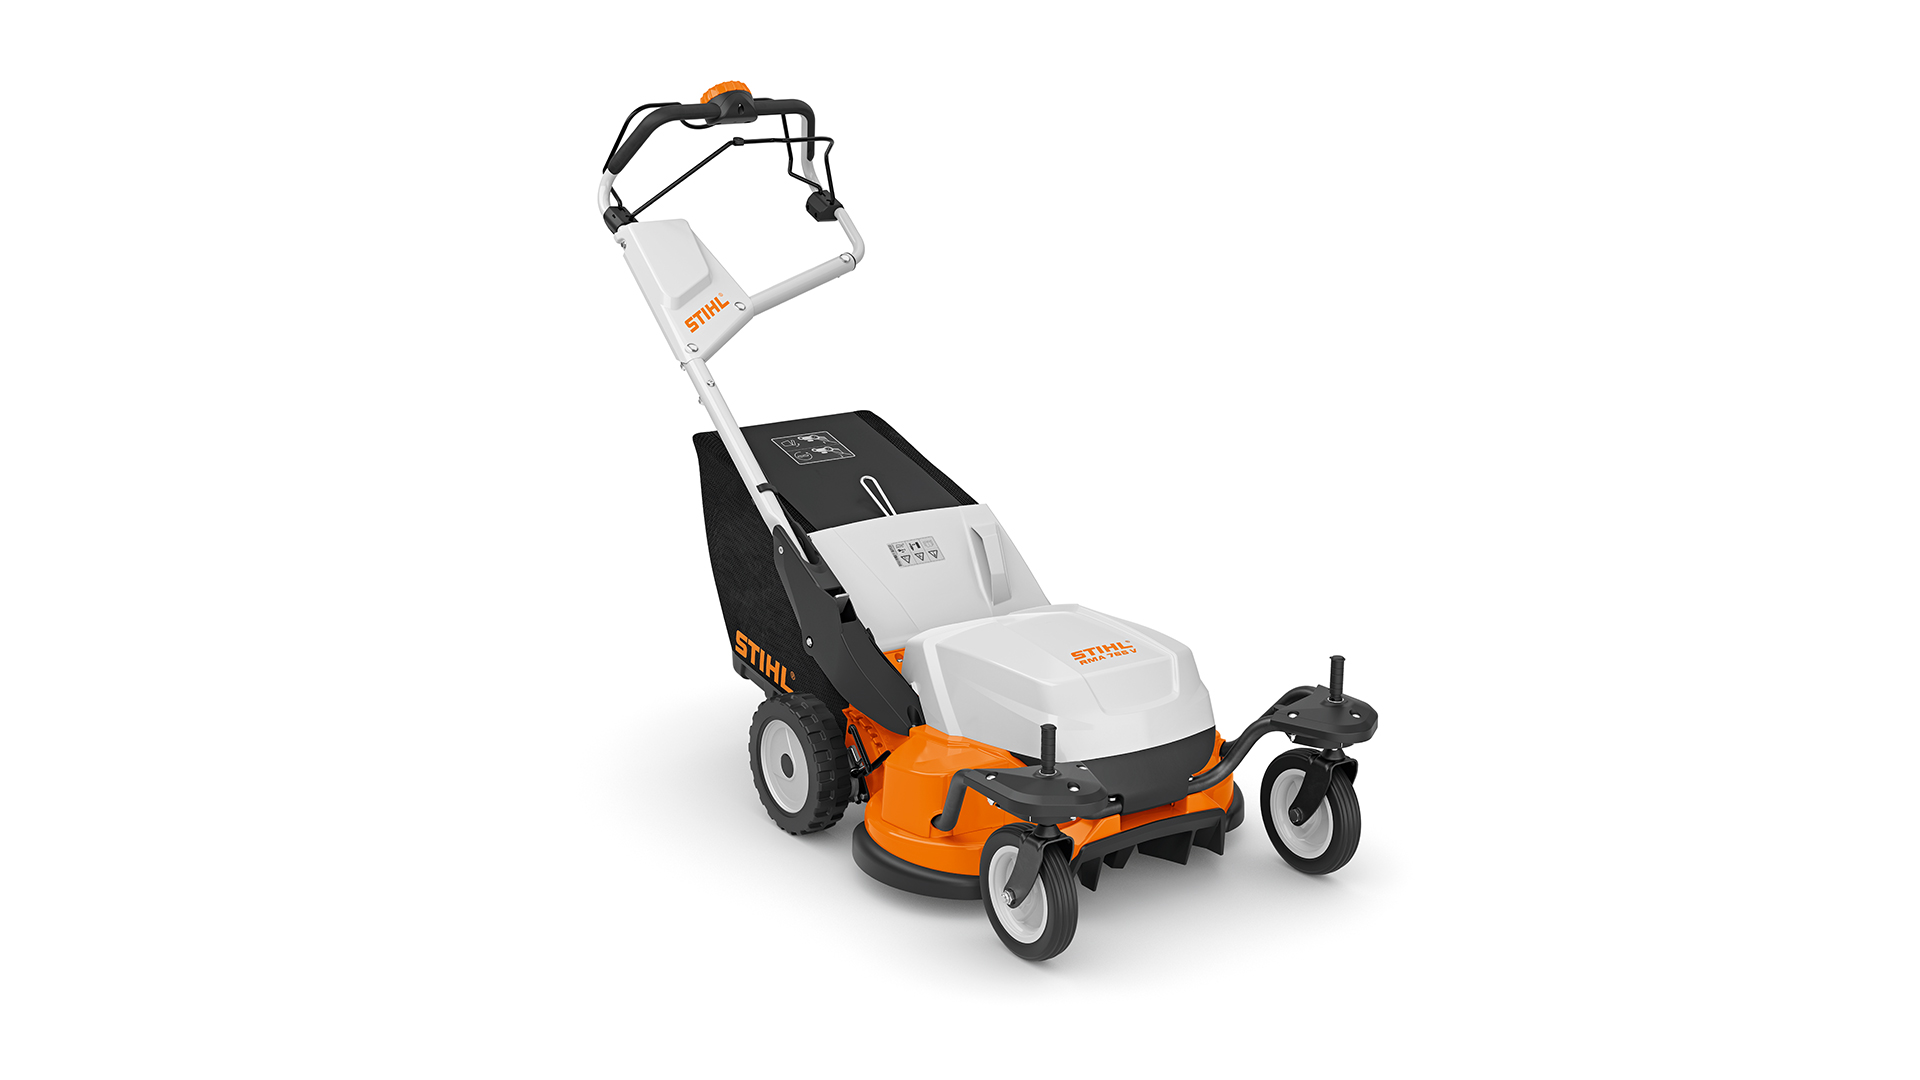 STIHL RMA 2 cordless lawn mower from the AP-System